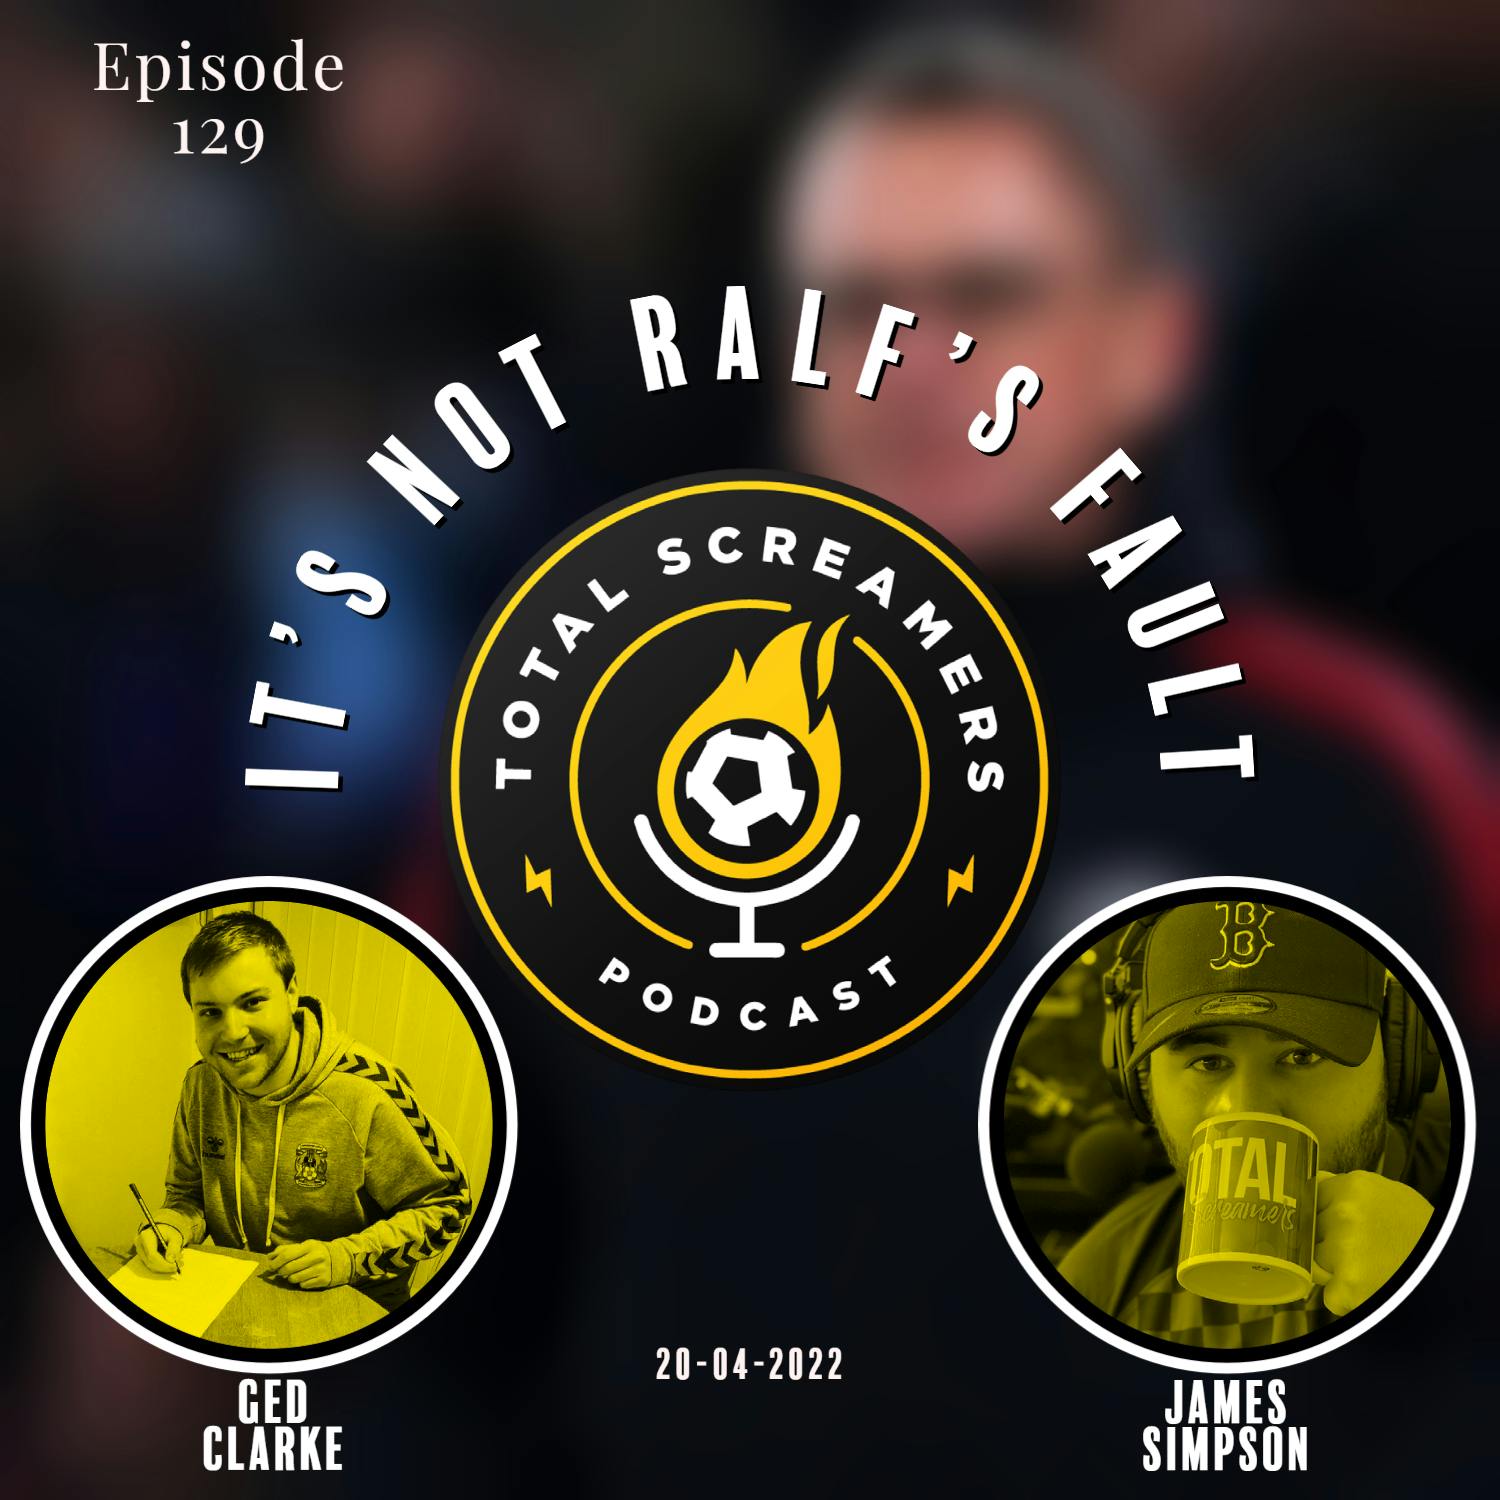 Total Screamers #129 It's Not Ralf's Fault